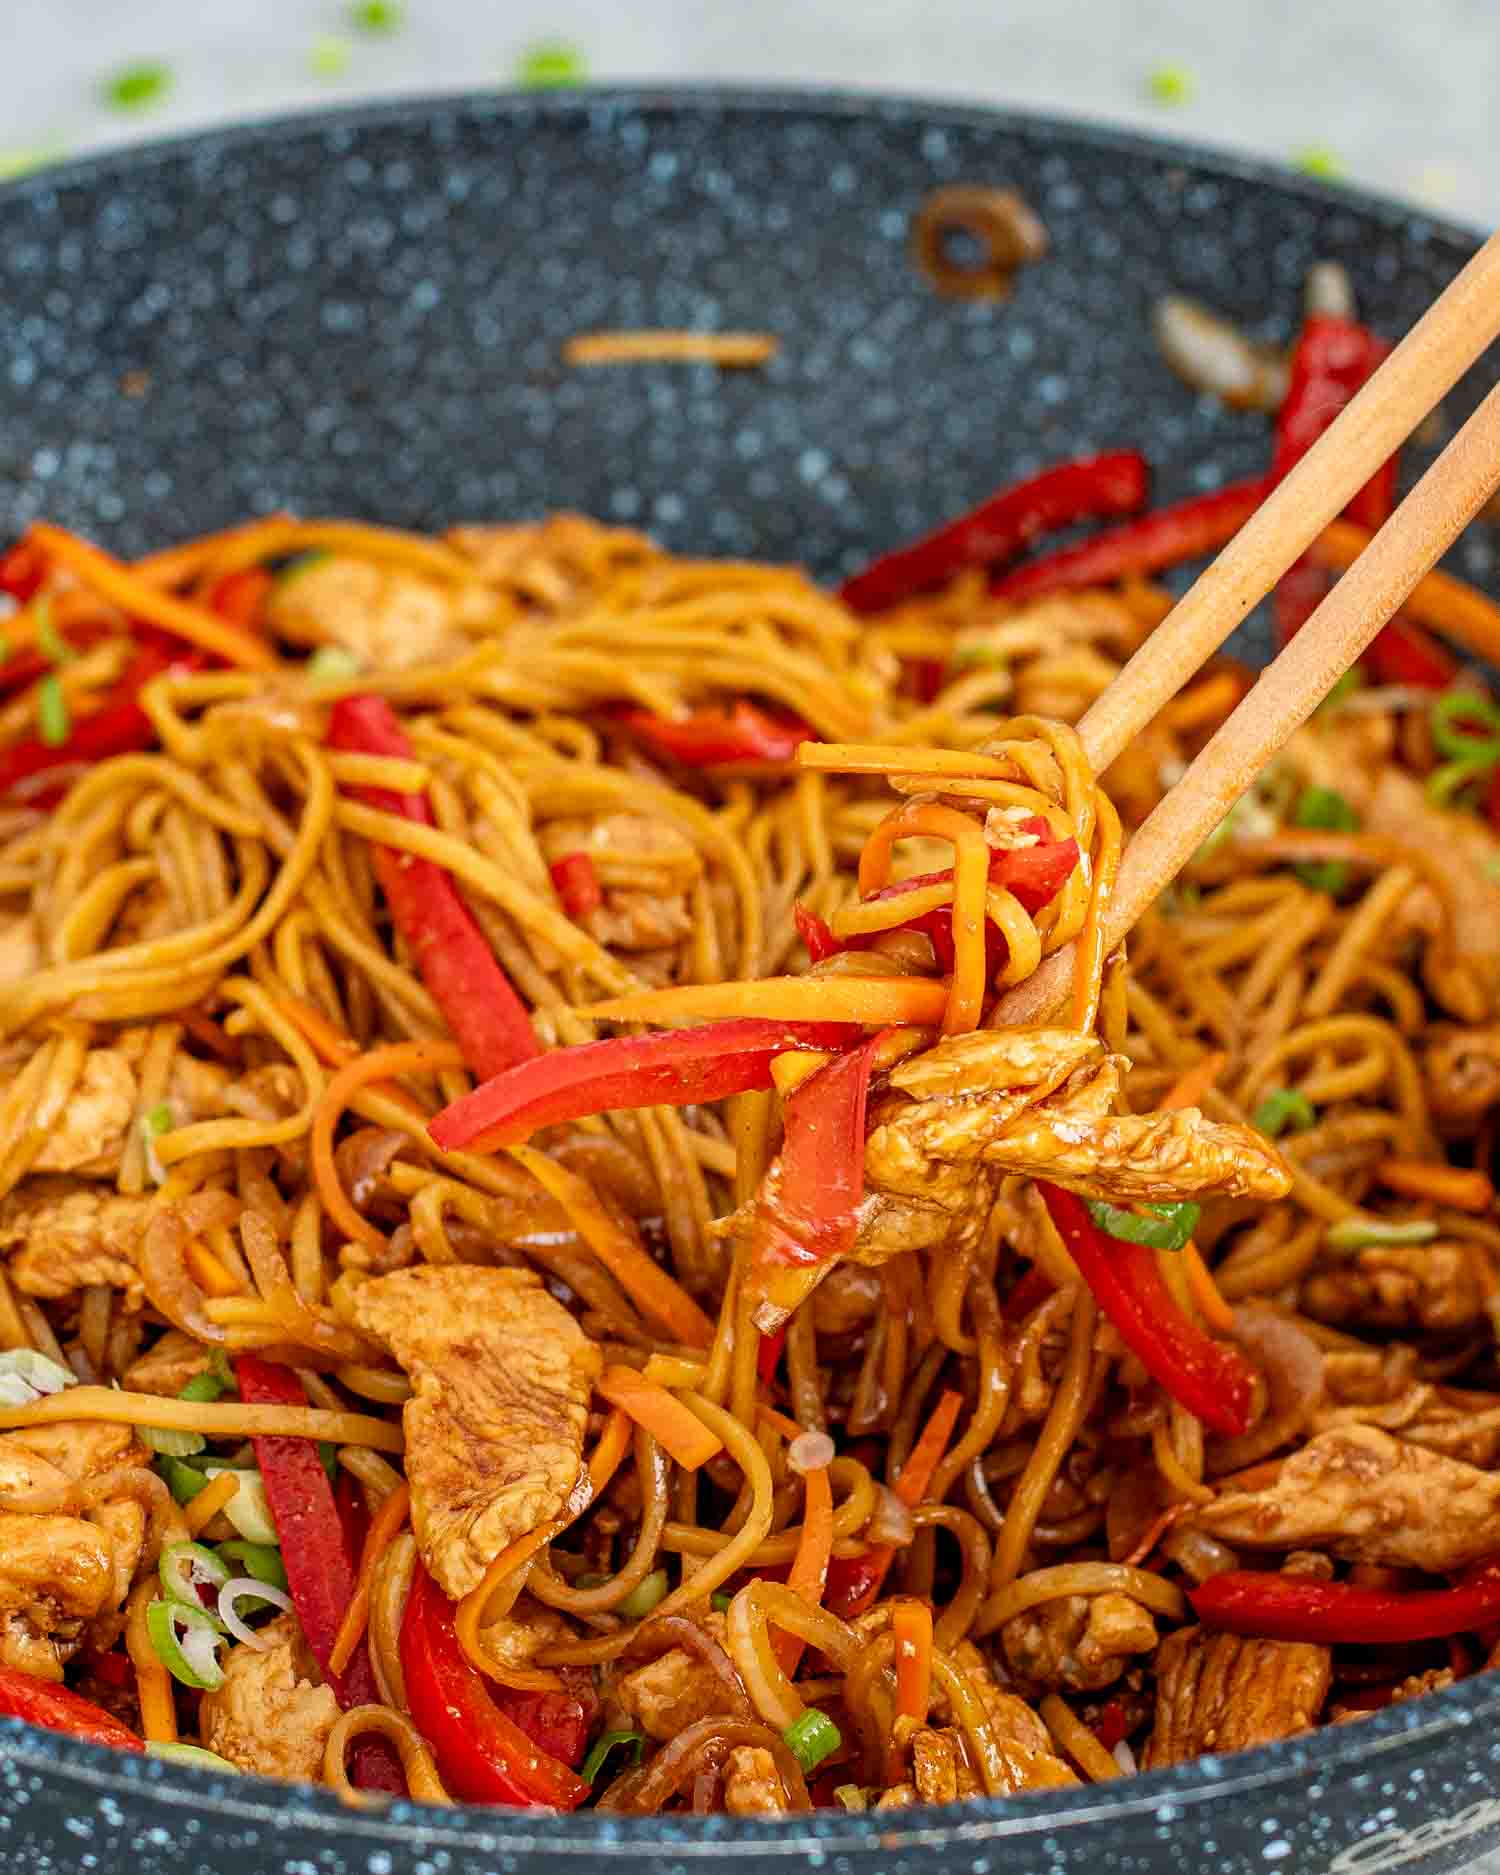 freshly made lo mein in a wok.